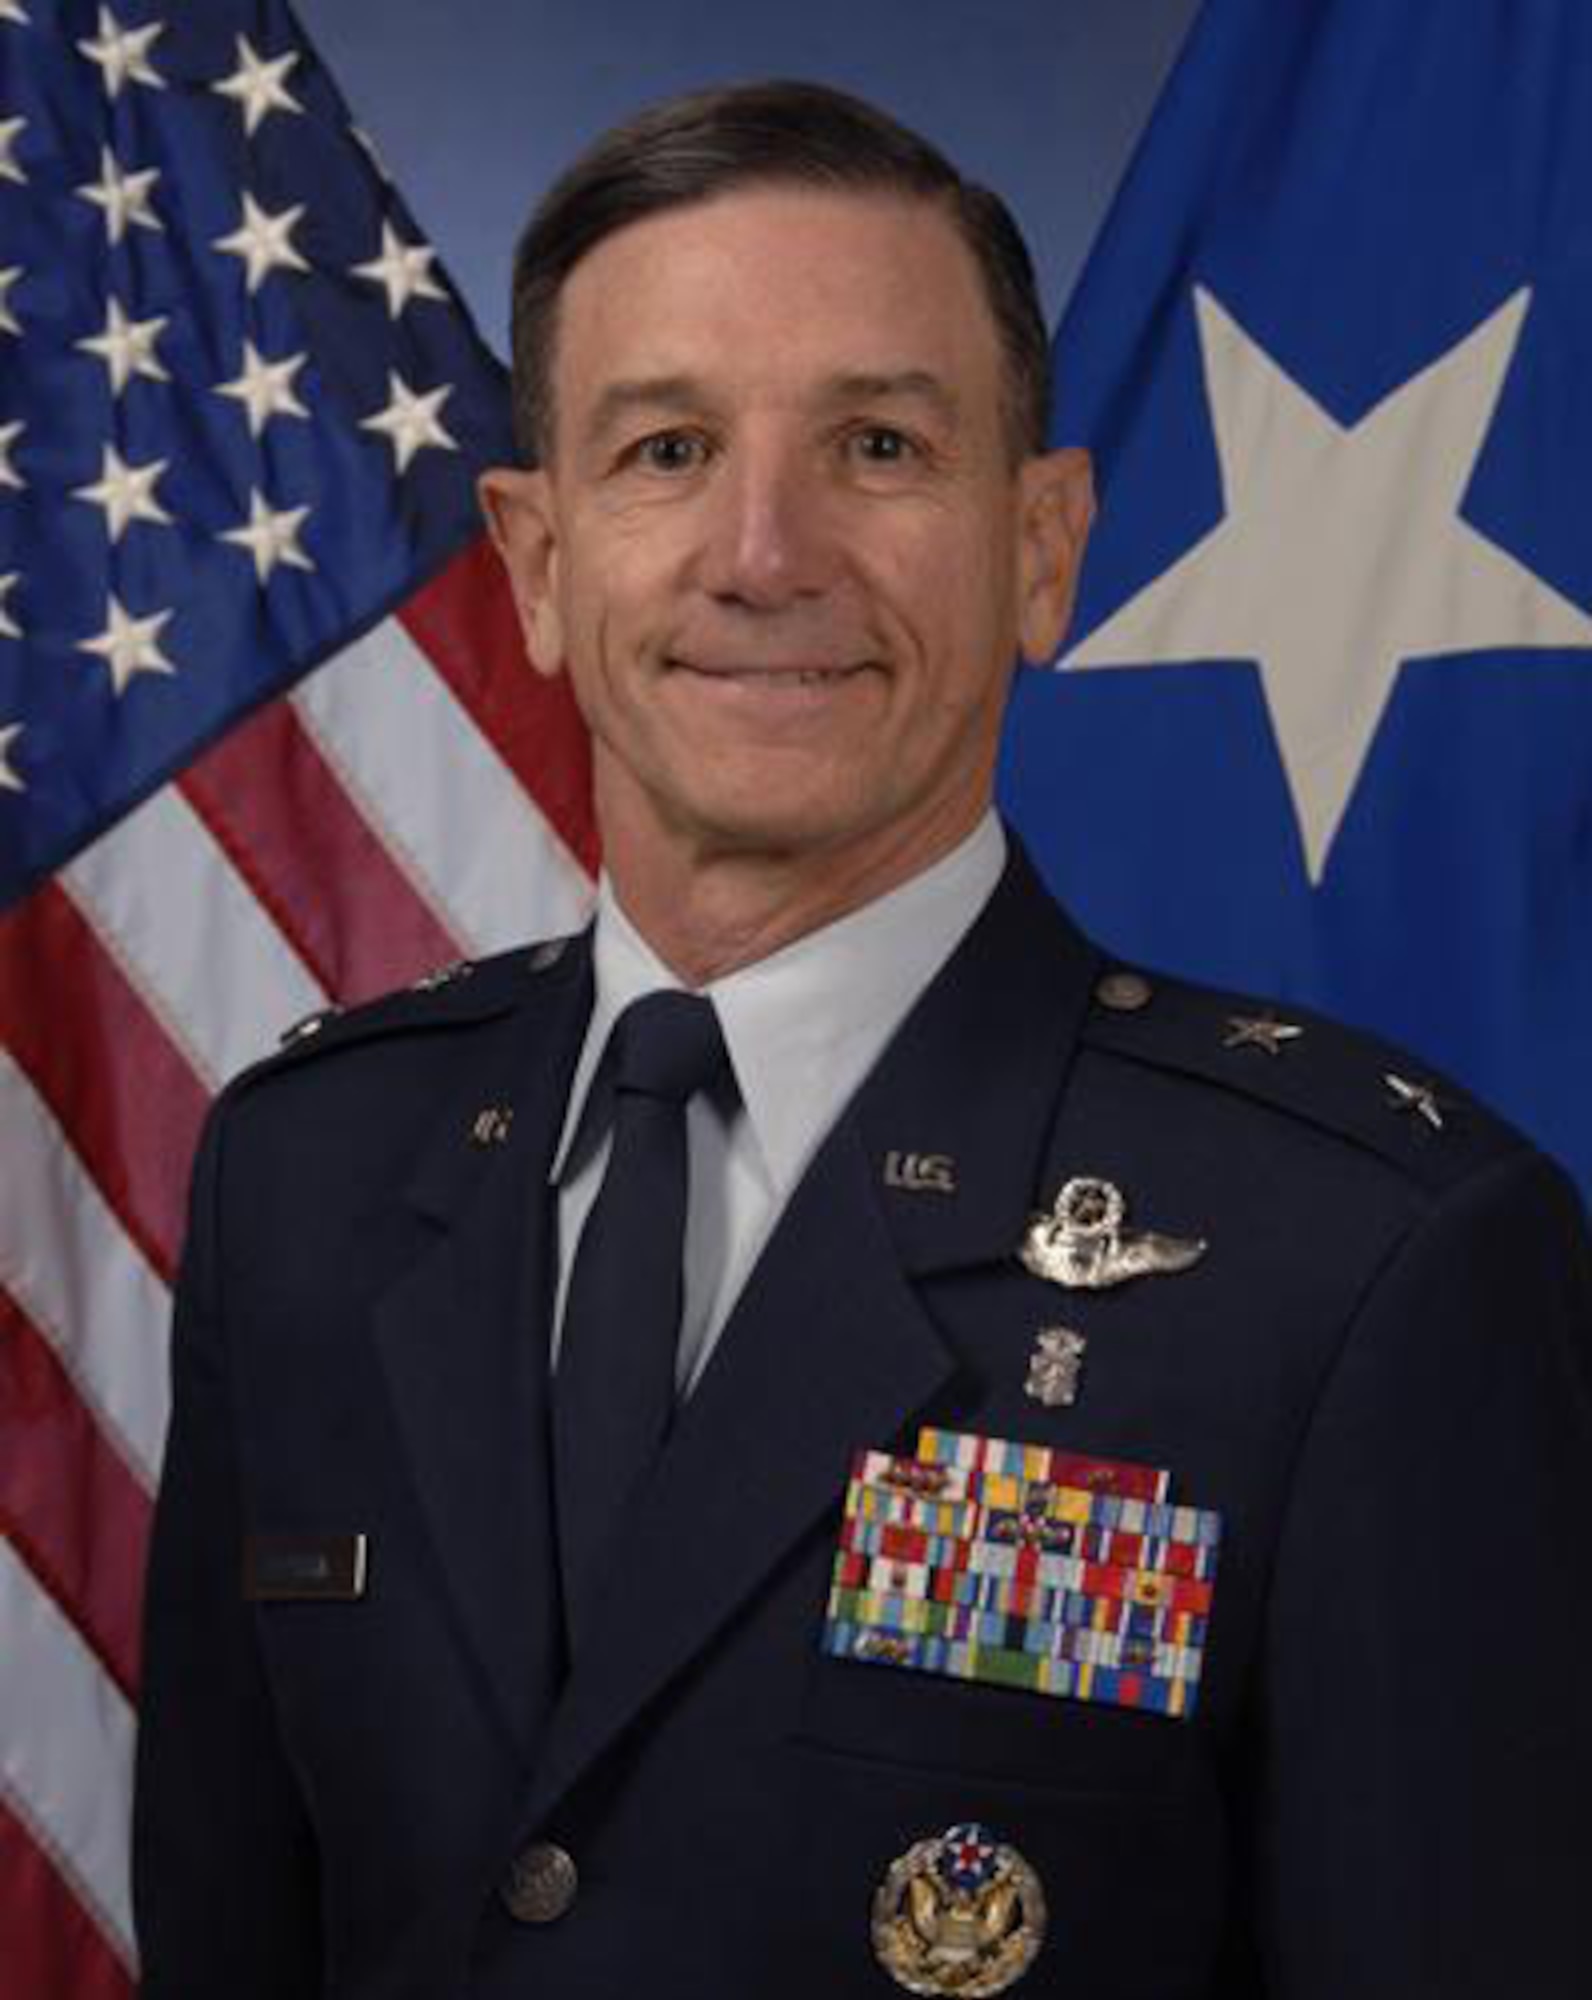 Maj. Gen. (Dr.) Byron C. Hepburn, commander of the 59th Medical Wing, has been named the first director of the San Antonio Military Health System.  Army Brig. Gen. Joseph Caravalho, Jr., commanding general of Brooke Army Medical Center, will serve as deputy director. The positions will rotate Services every two years.  